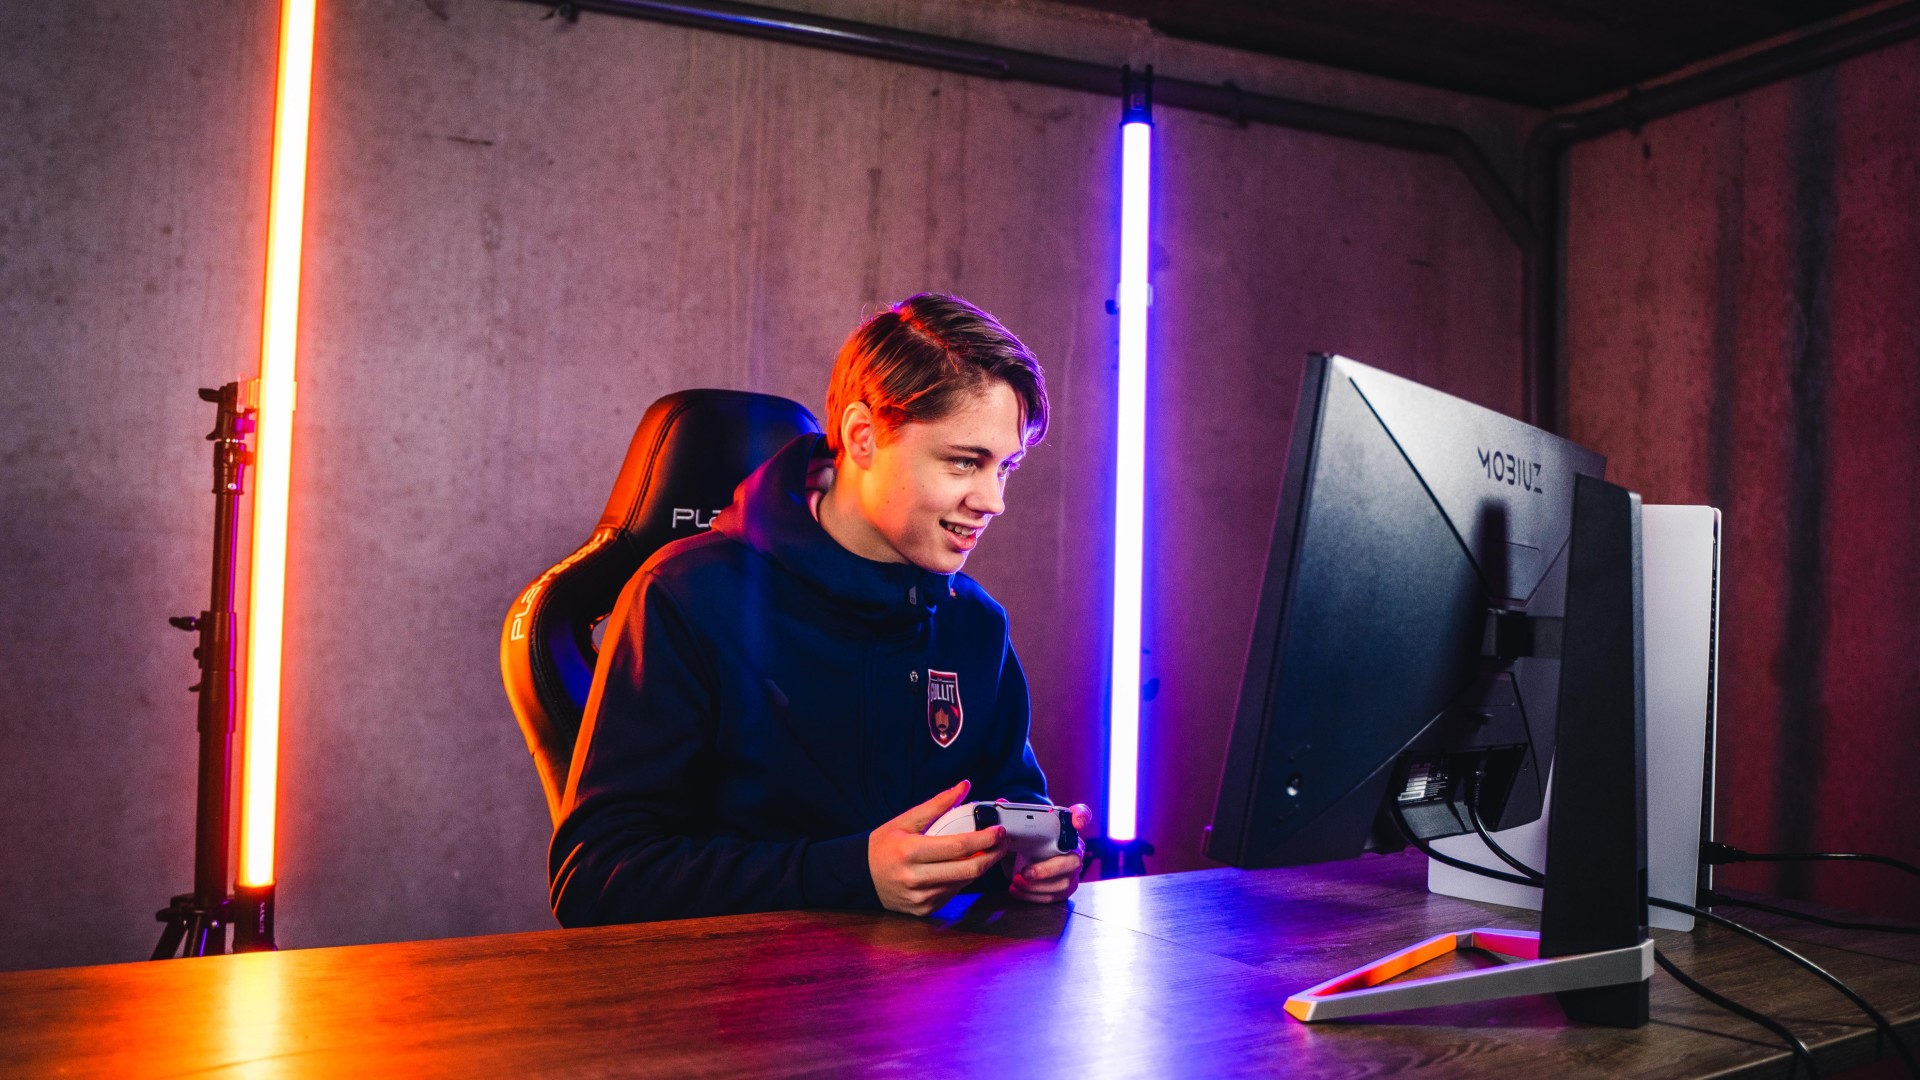 This photo features Dani Visser, professional FIFA player for Team Gullit and a BenQ MOBIUZ EX2510S monitor.